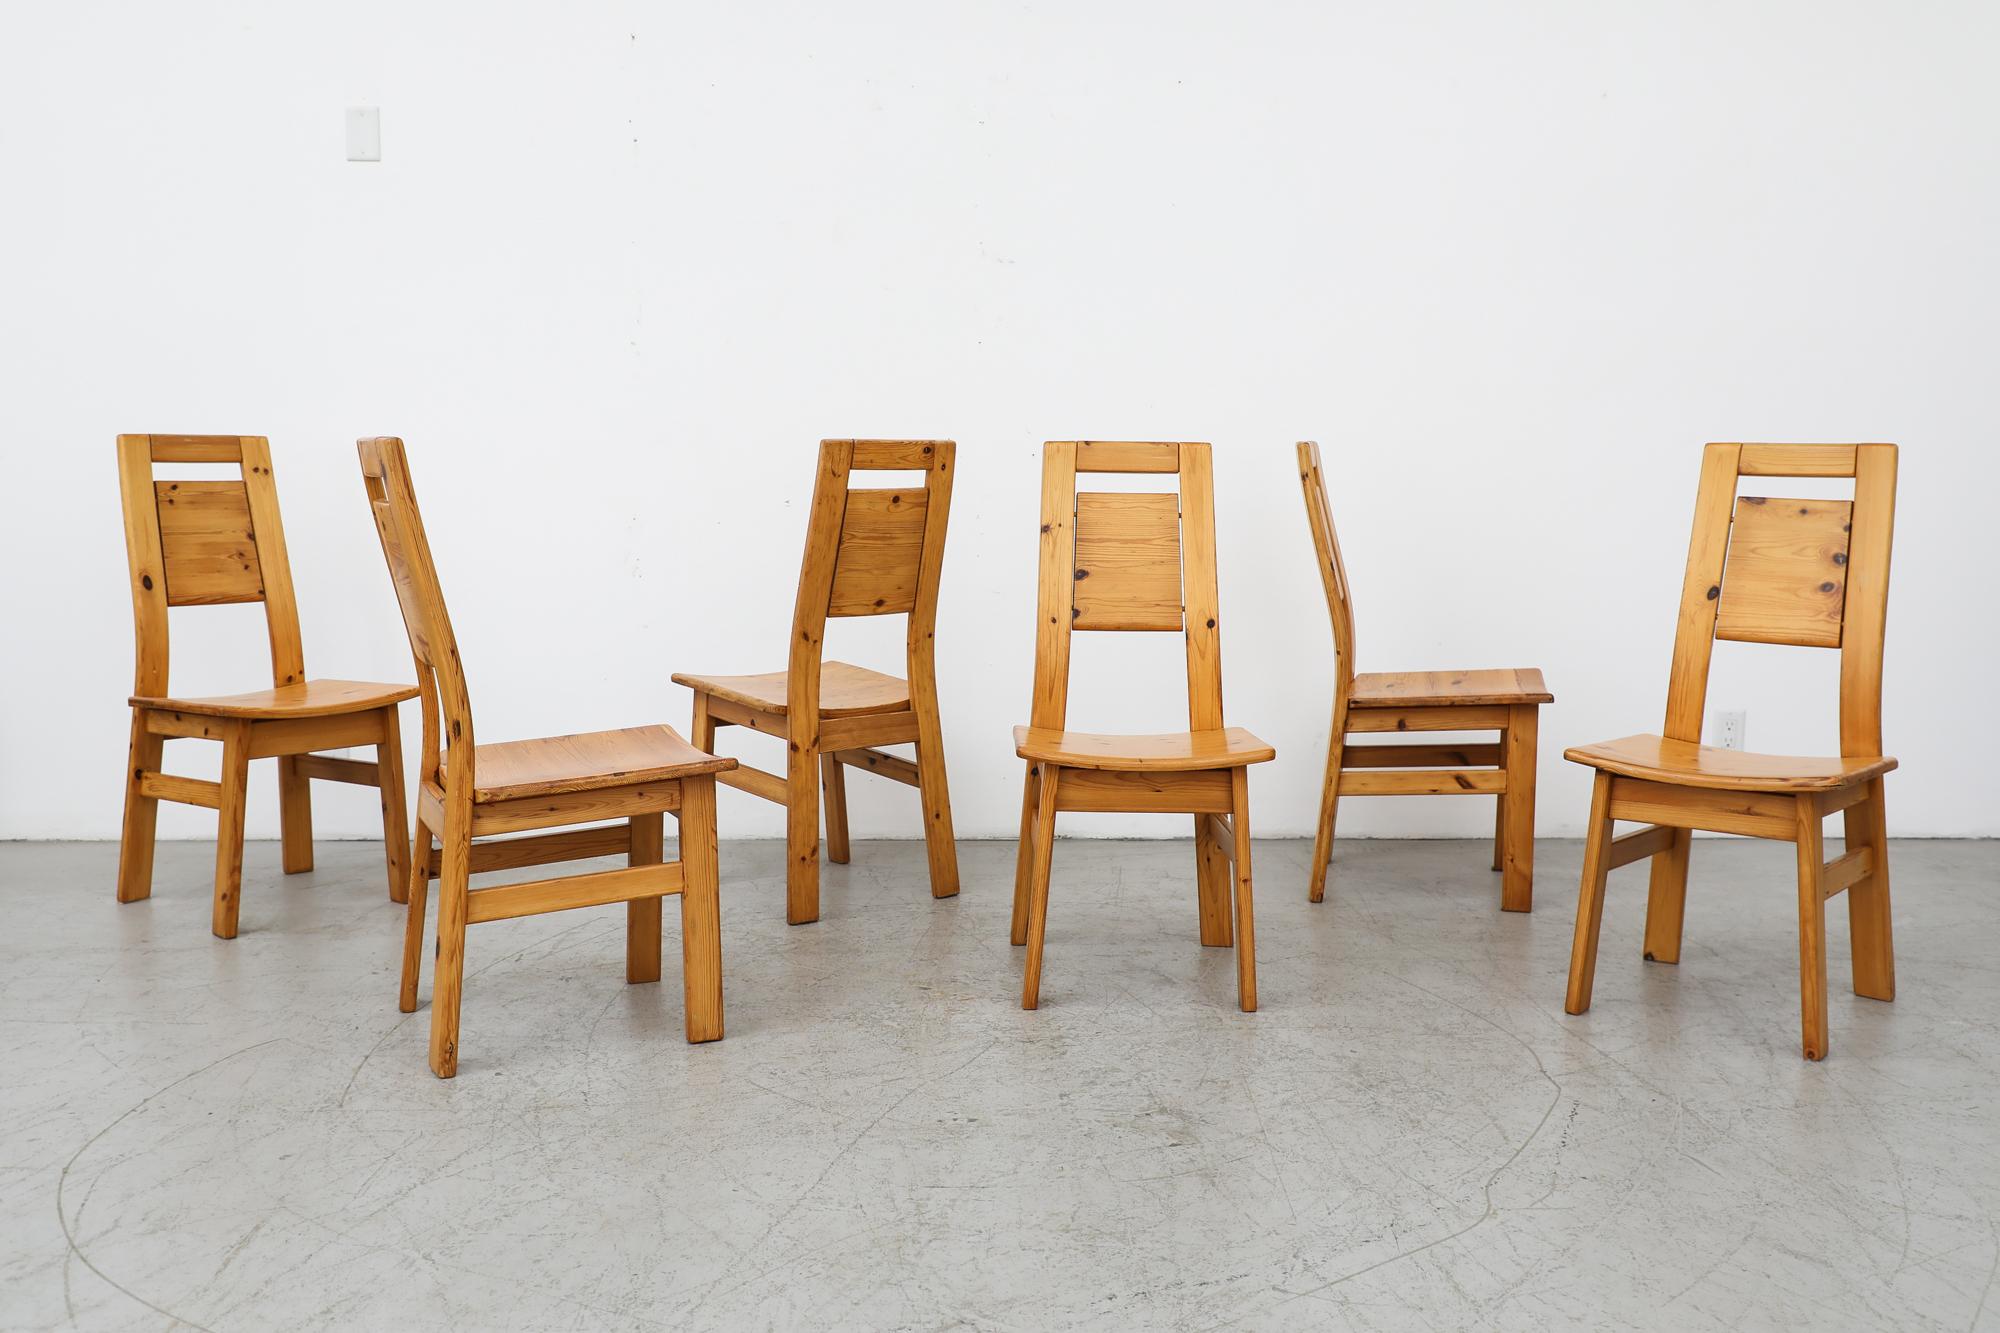 Nice set of 6 pine high back dining chairs by IImari Tapiovaara for Laukaan Puu, Finland 1960's. In good original condition, with nice golden patina and wear that is consistent with their with age and use. Priced as a set of 6. Table listed